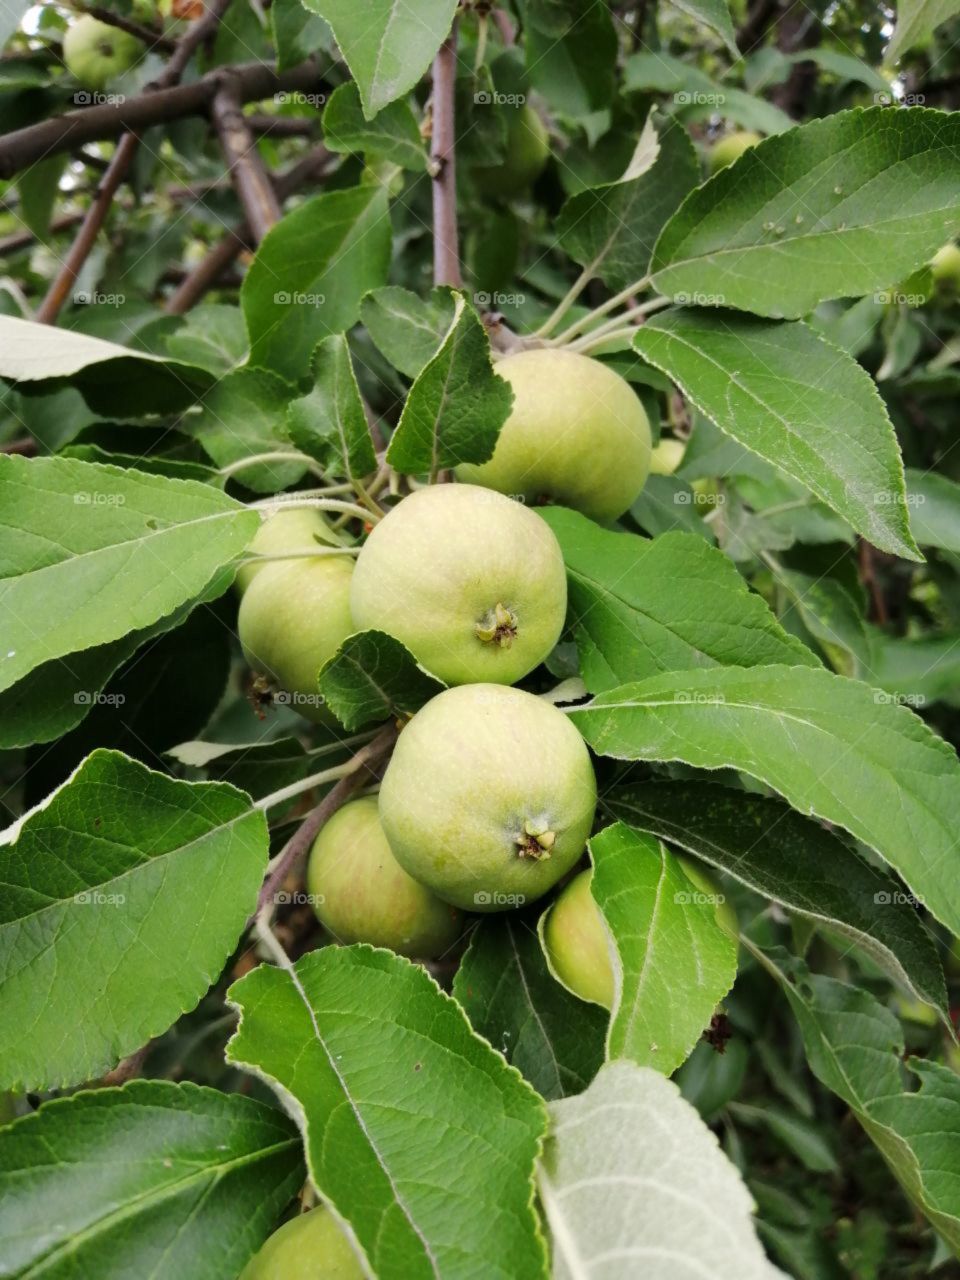 Green young unripe small apples on an apple tree with bright leaves on branches